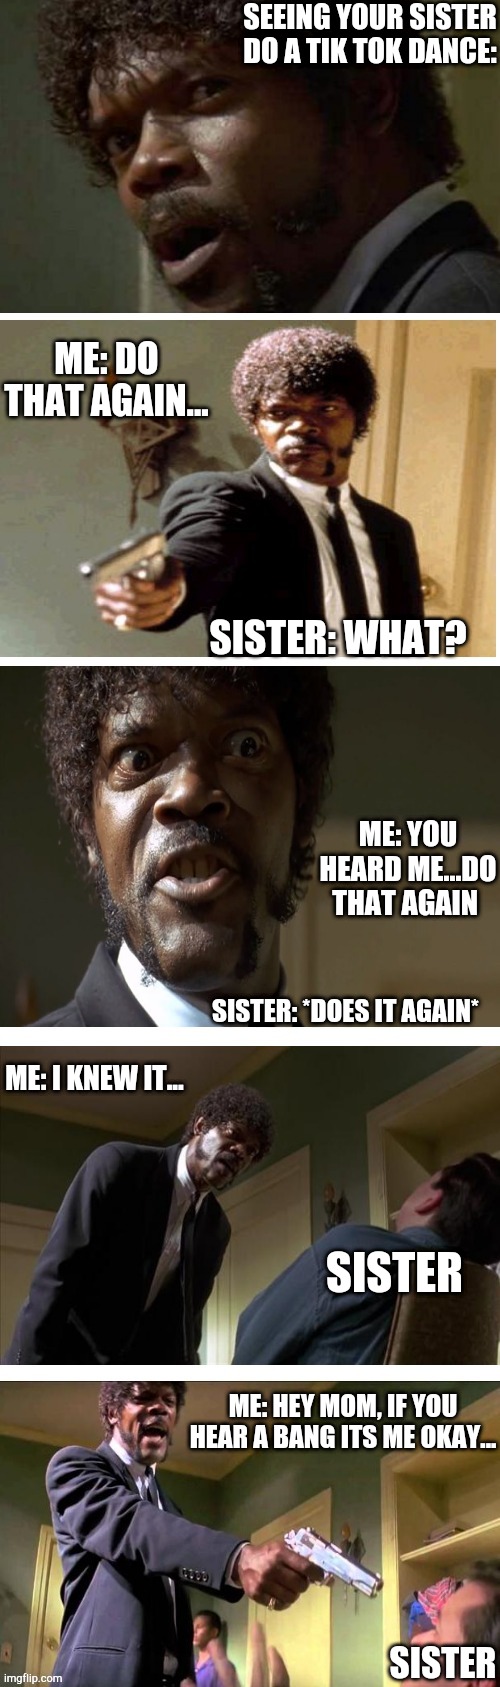 Don't tik tok kids. | SEEING YOUR SISTER DO A TIK TOK DANCE:; ME: DO THAT AGAIN... SISTER: WHAT? ME: YOU HEARD ME...DO THAT AGAIN; SISTER: *DOES IT AGAIN*; ME: I KNEW IT... SISTER; ME: HEY MOM, IF YOU HEAR A BANG ITS ME OKAY... SISTER | image tagged in samuel l jackson,tiktok,funny meme,funny,just stop | made w/ Imgflip meme maker